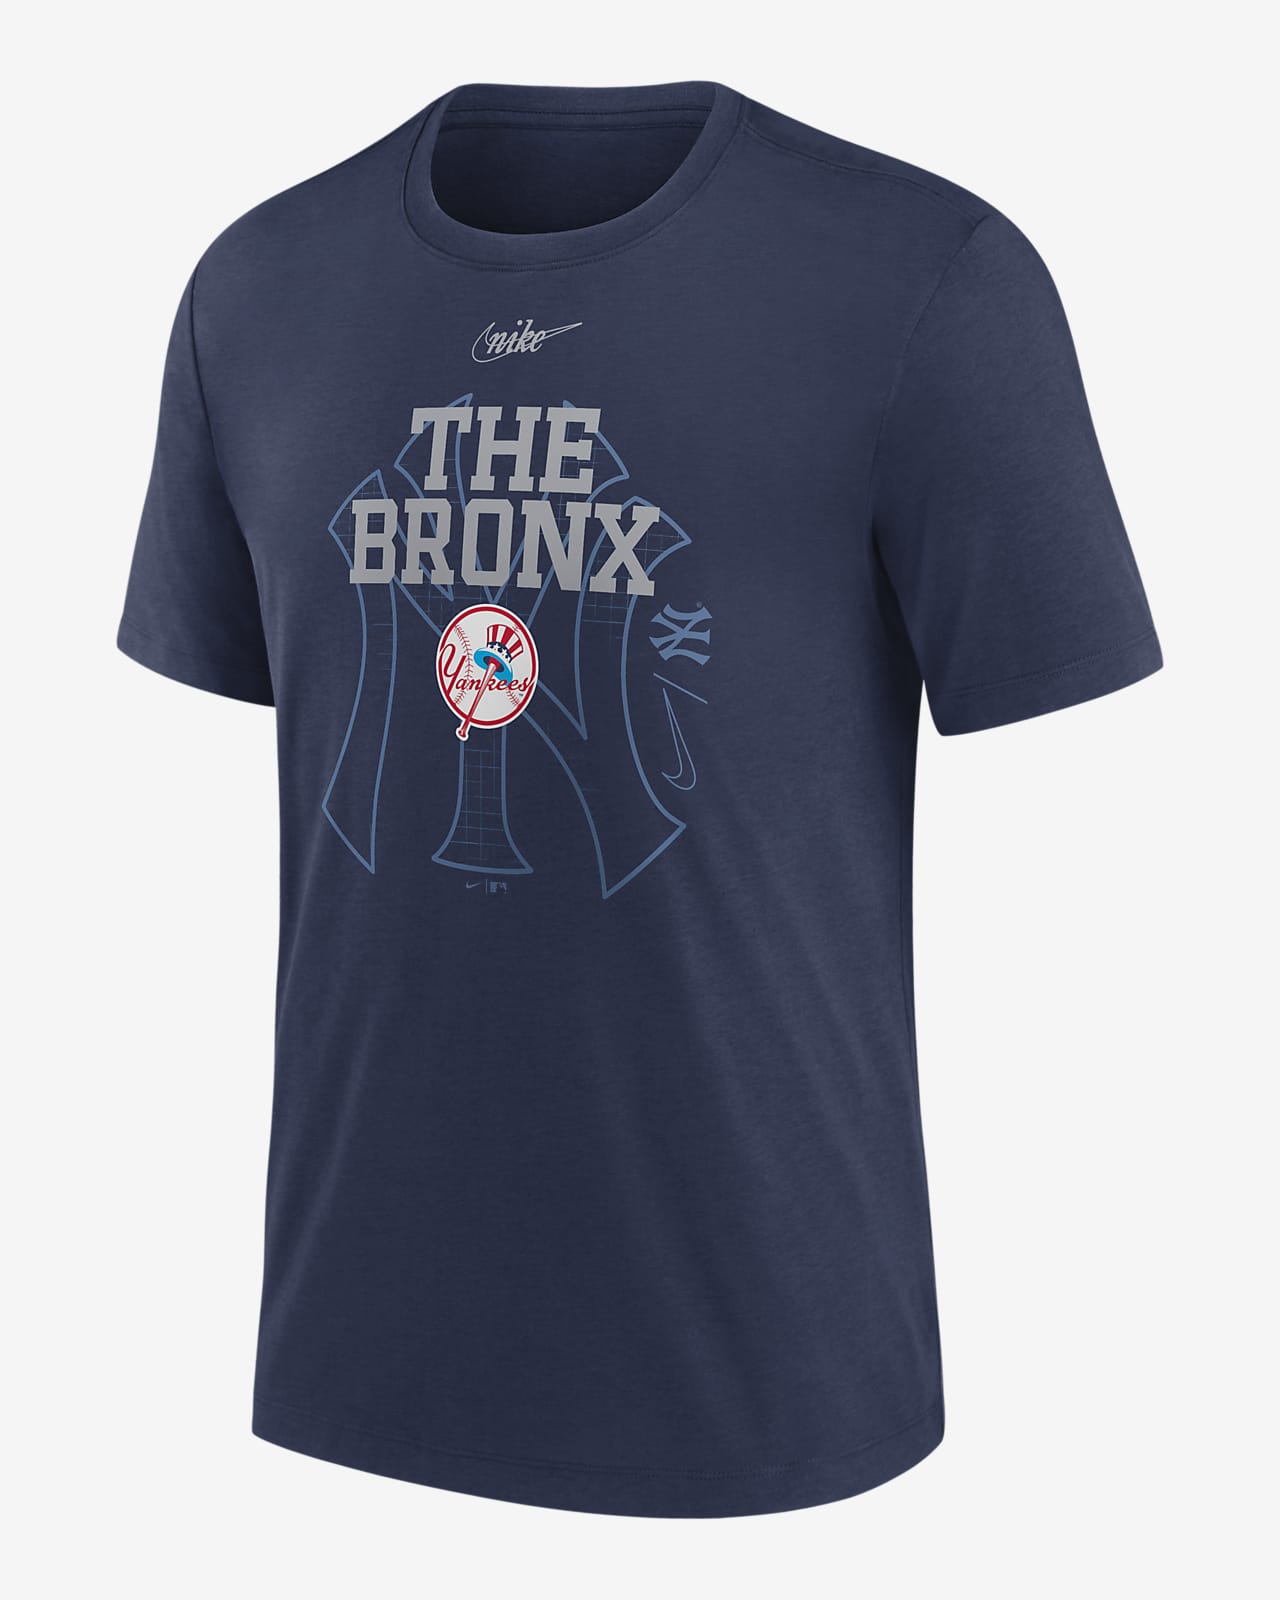 Bronx Bombers Clothing for Sale